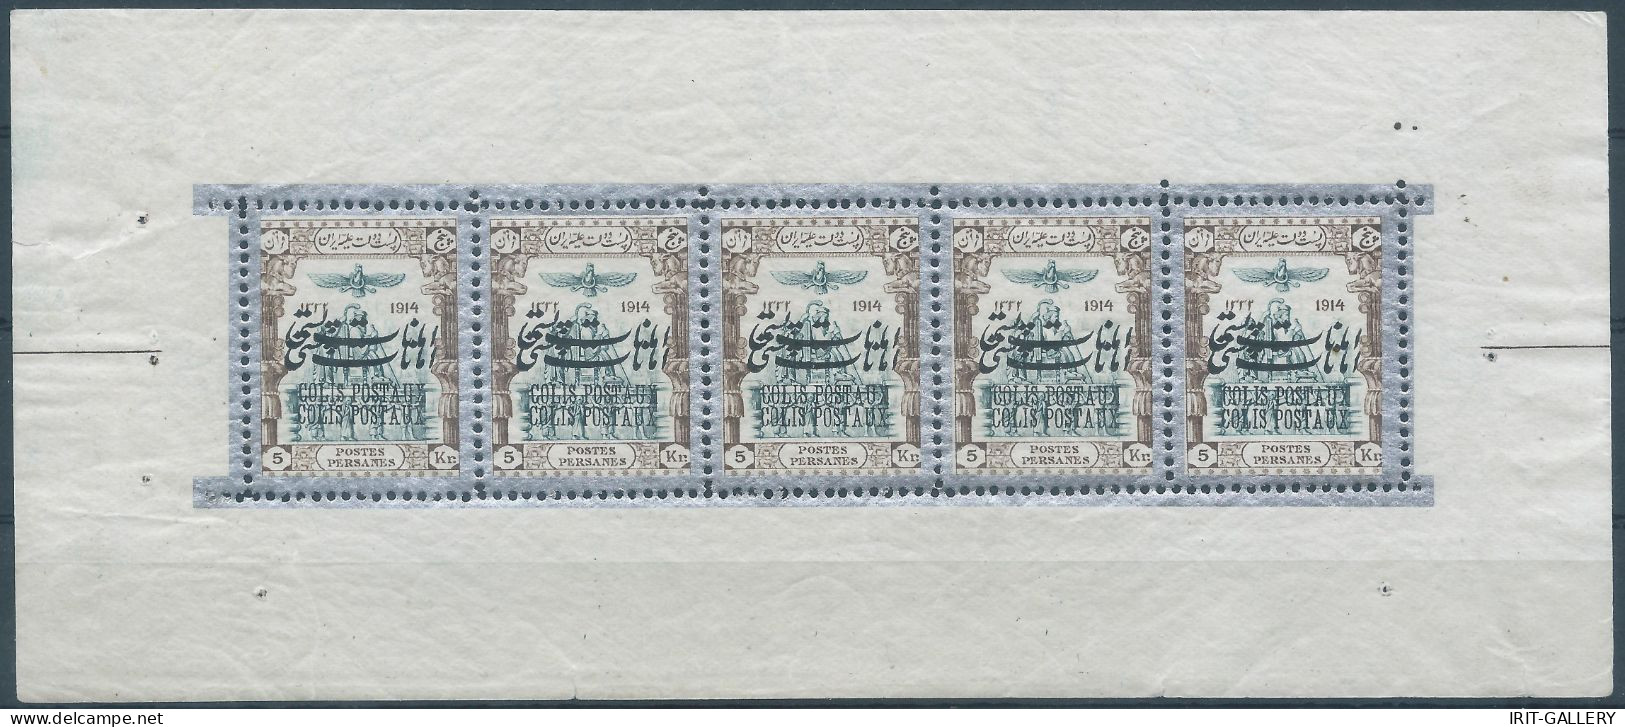 1915 The Qajar Crown,2 Complete Sheetlet Of Five,Varieties(Double Overprinted Colis Postaux)on 9ch And 5Kr. - Iran